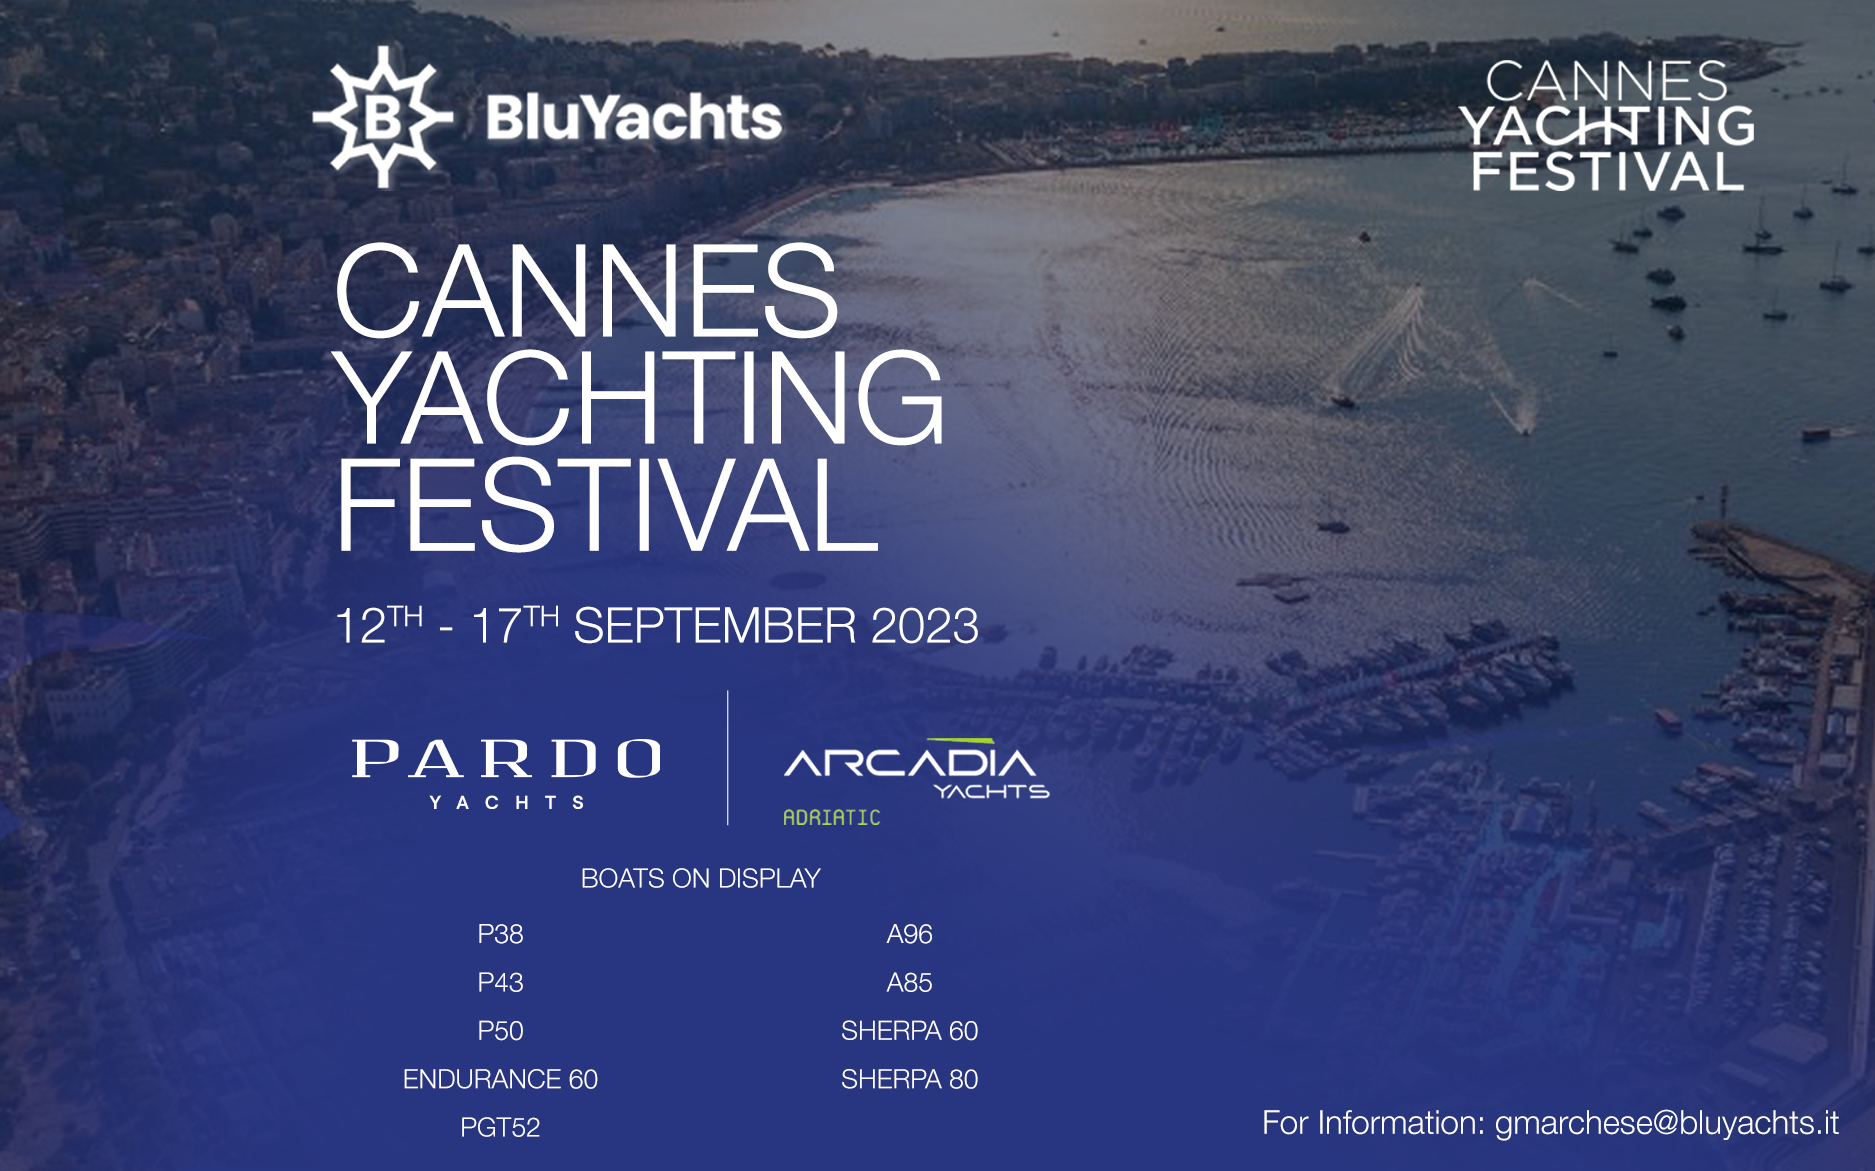 We are glad to invite you to the CANNES YACHTING FESTIVAL from the 12th September to the 17th September 2023.